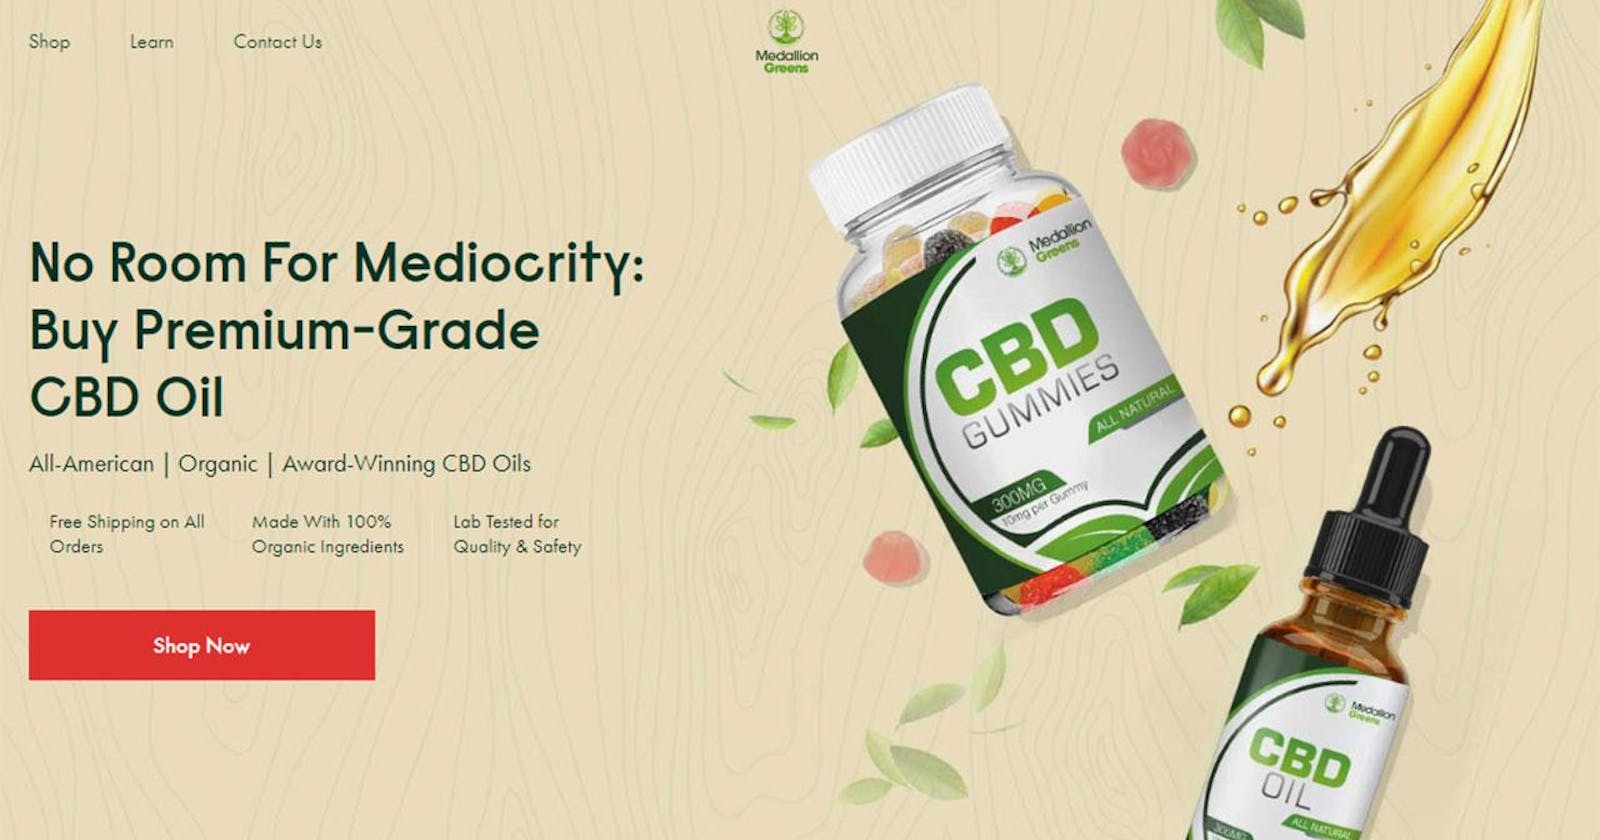 Medallion Greens  CBD Gummies Don't Buy Before Read Official Reviews!